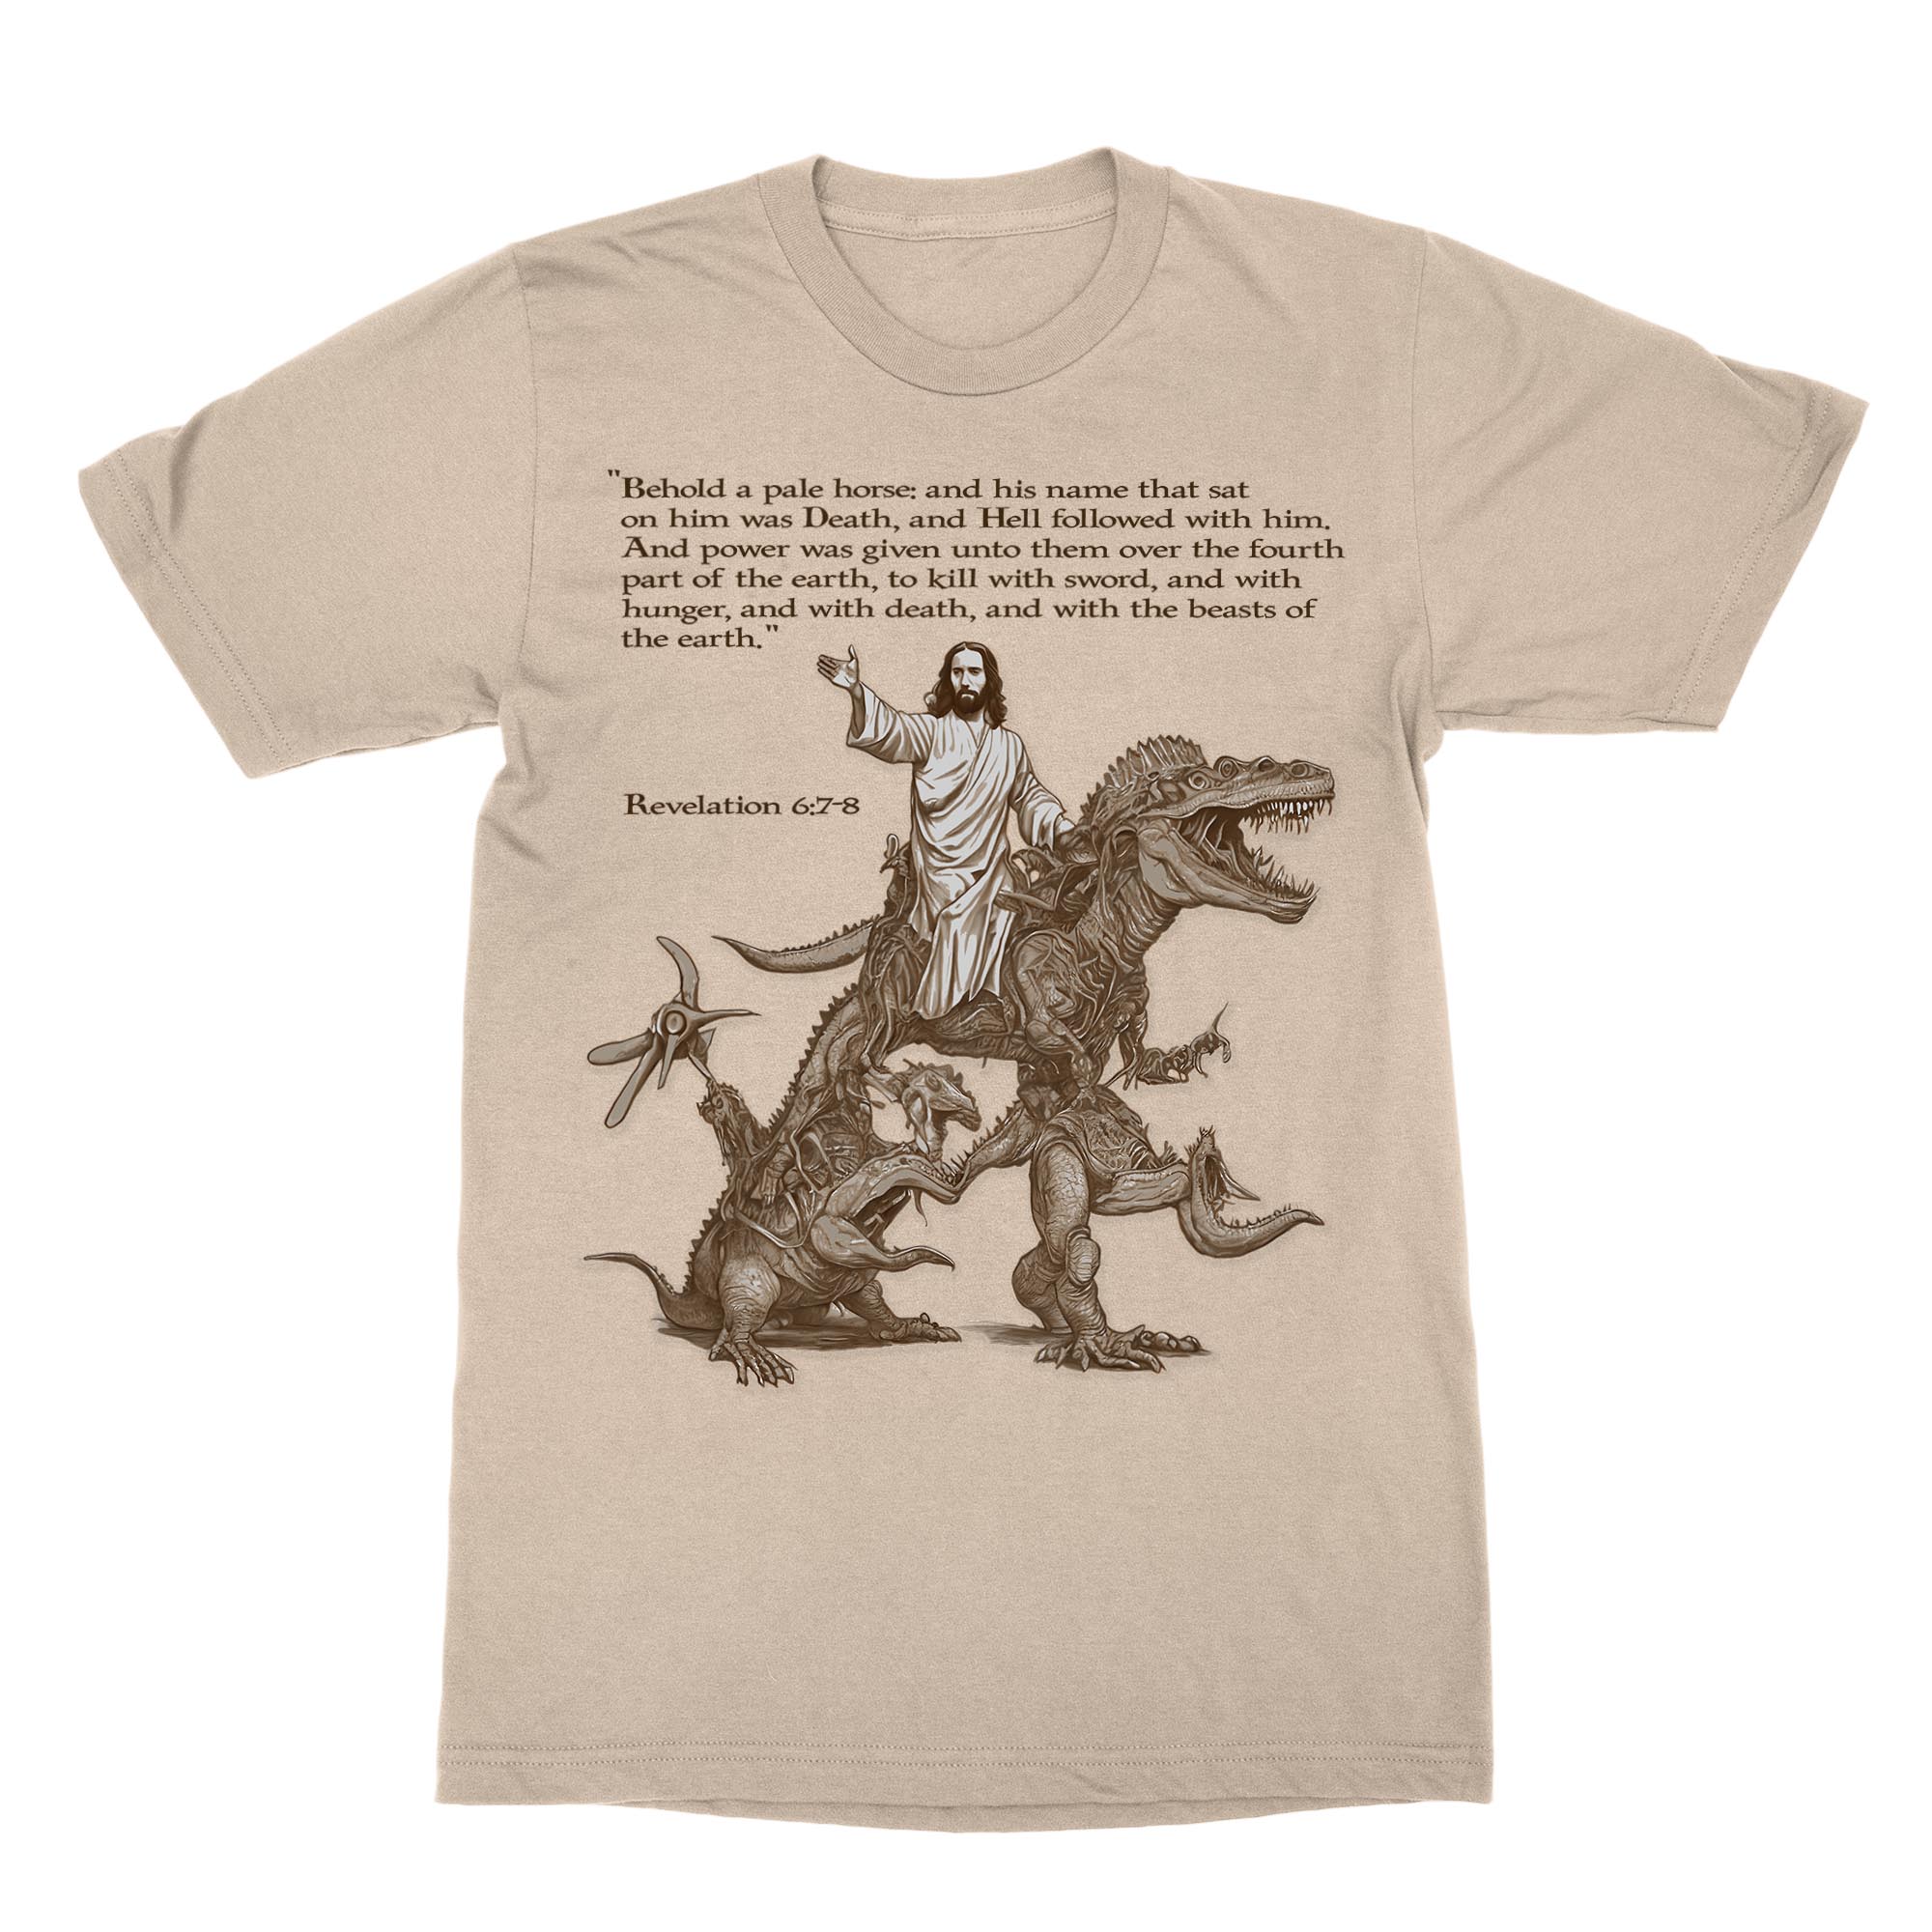 T-Shirts XS / Heather Tan Armageddon: Wrathful Jesus Returns with His Alien Army, The Second Coming, Apocalypse Graphic Art T-Shirt